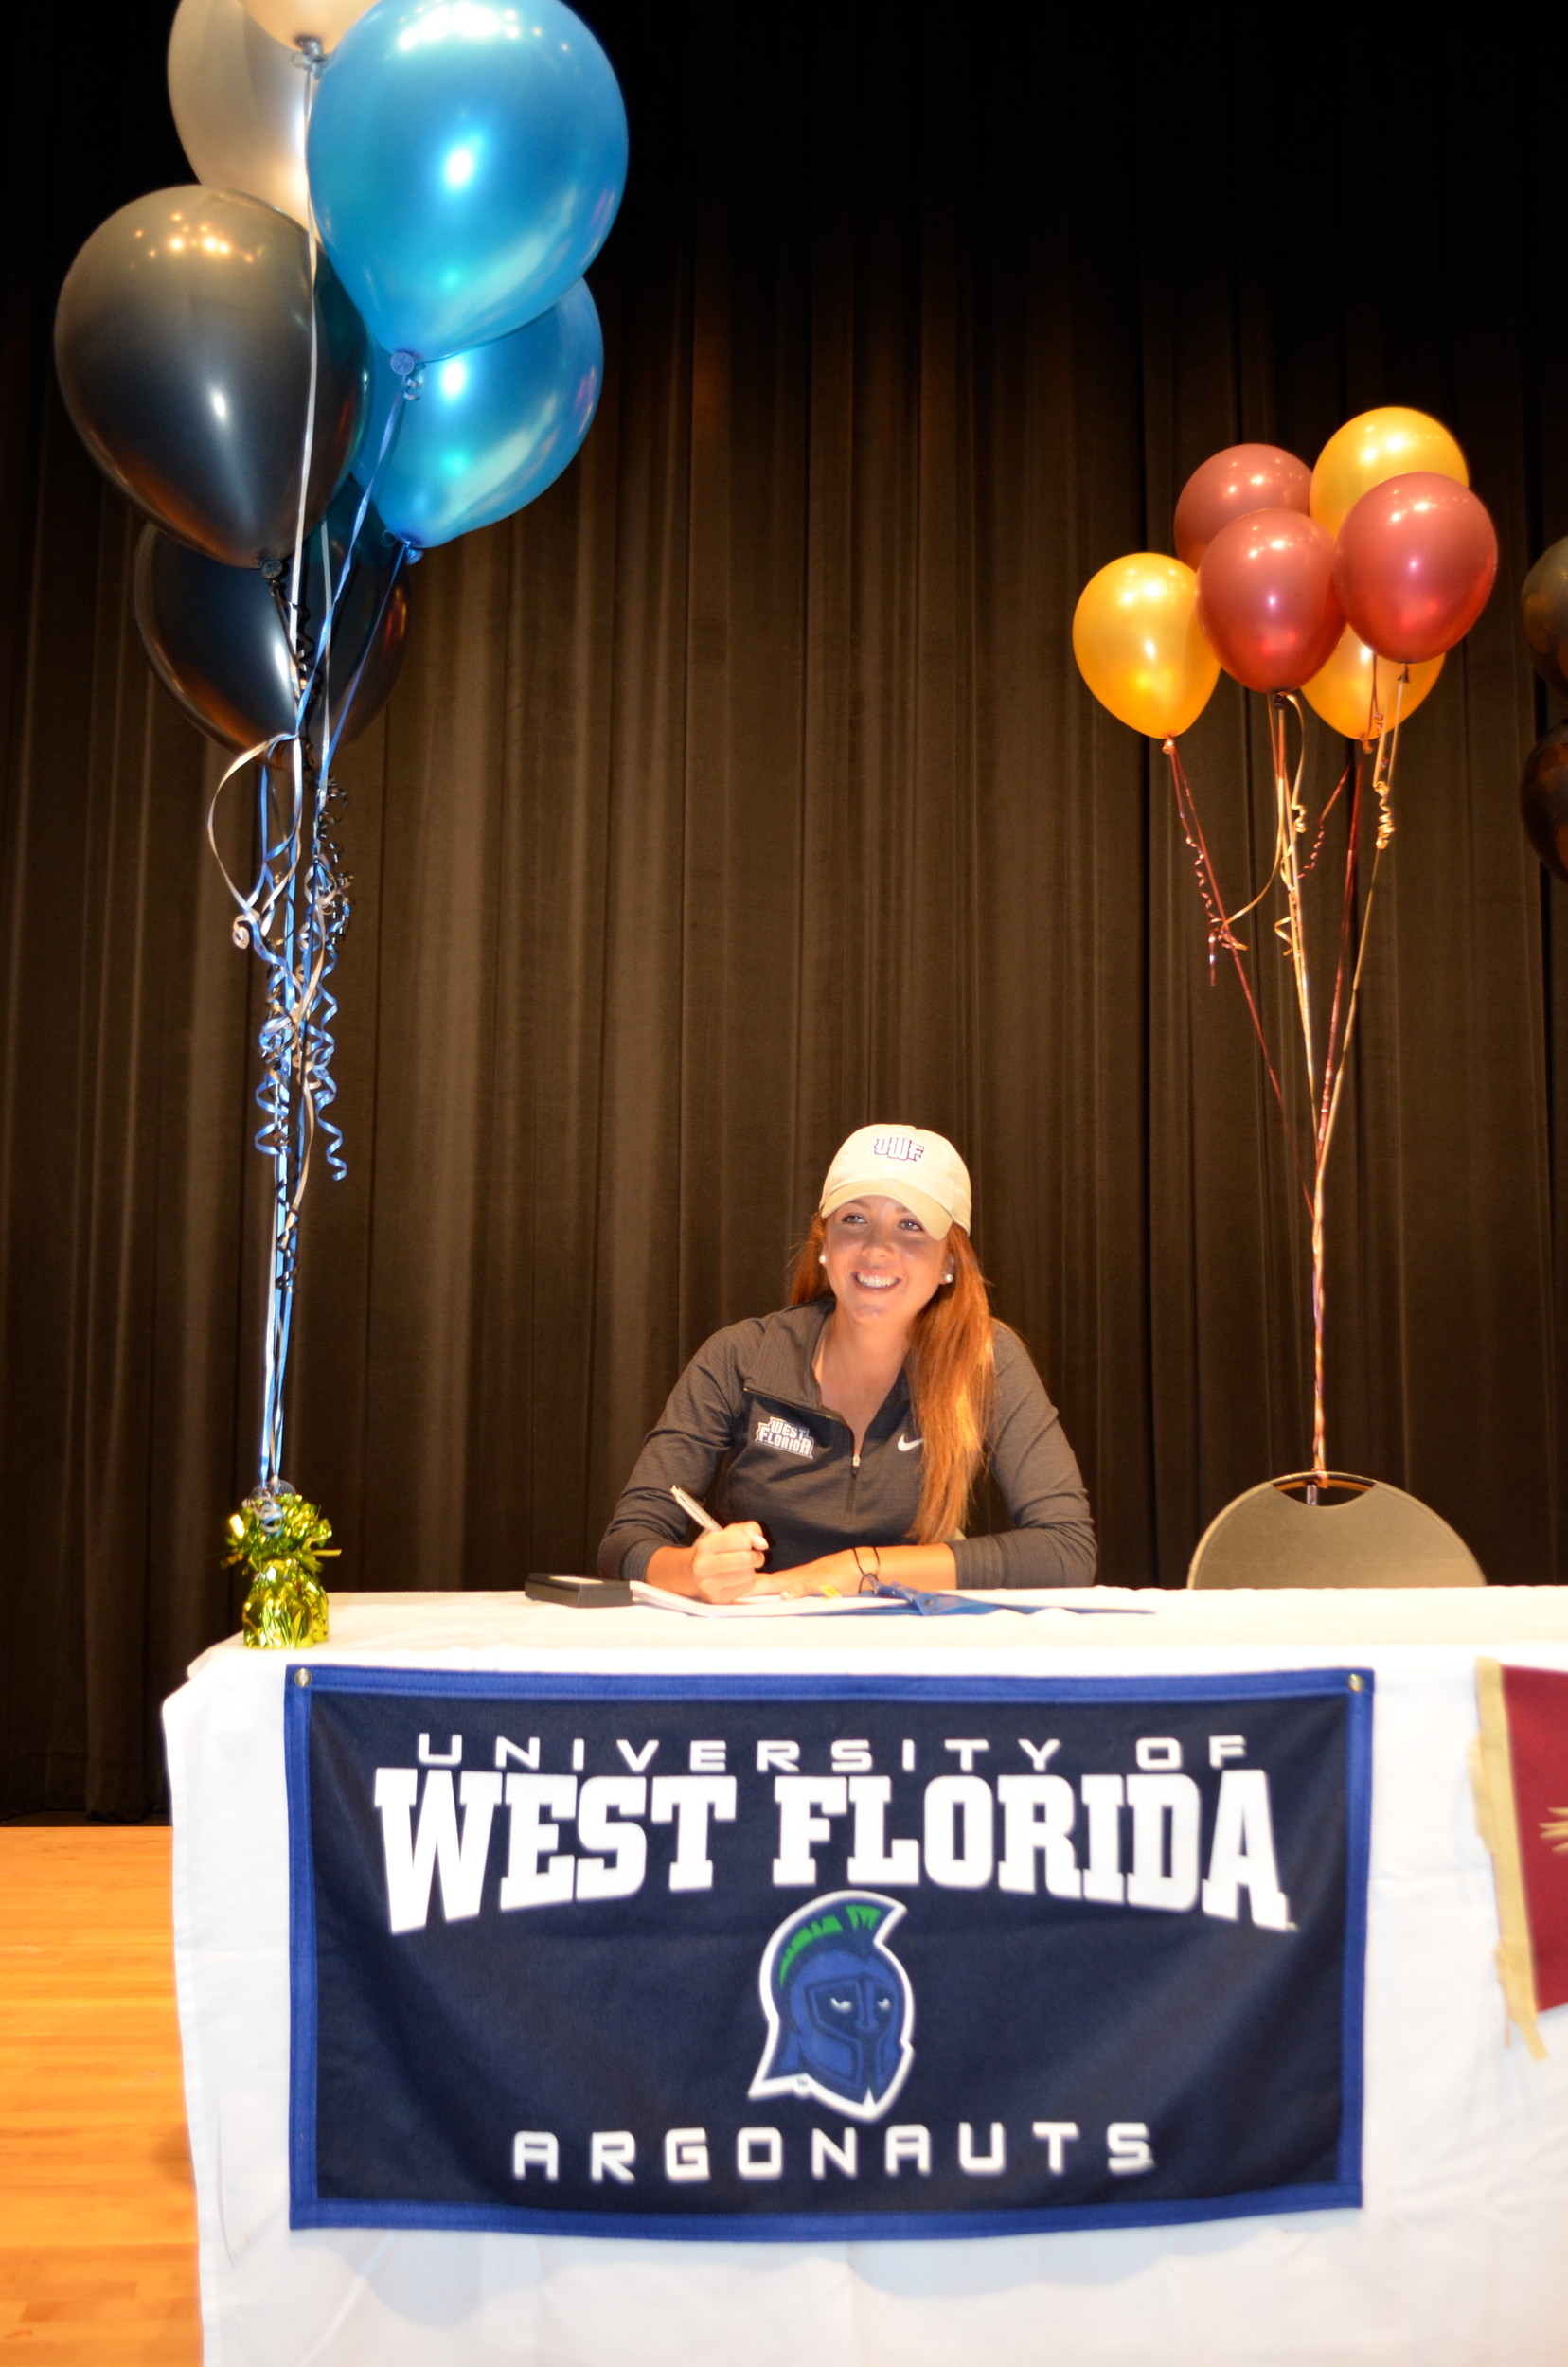 Ponte Vedra High School senior and team captain, Hannah Berman, signed her National Letter of Intent to play her college golf at the University of West Florida. Berman lettered in golf for seven years, playing from 6th-9th grades at The Bolles School and 10th-12th at PVHS, where she was a two-time MVP, District Champion, two-time Regional Champion and led the team to the State Championship tournament in each of her three years. At a recent team banquet Berman received a Lifetime Achievement Award on behalf of both schools.  
Said her swing coach John Berardi of Ponte Vedra’s Berardi Golf Academy, and who has worked with Hannah since she was 11 years old, “I’ve been around this game for a long time, and there are few people like Hannah.” He continued, “She is certainly a gifted athlete who is only going to get better as she blooms in college, but she has done things with her game outside the ropes that few adults have done. She managed to blend her love for the game with her passion for caring about other people. She’s just got a big heart, and she has a maturity that we don’t see in kids very often.” 
Berman was the 2015 recipient of the USGA/AJGA President’s Leadership Award for her community service work.